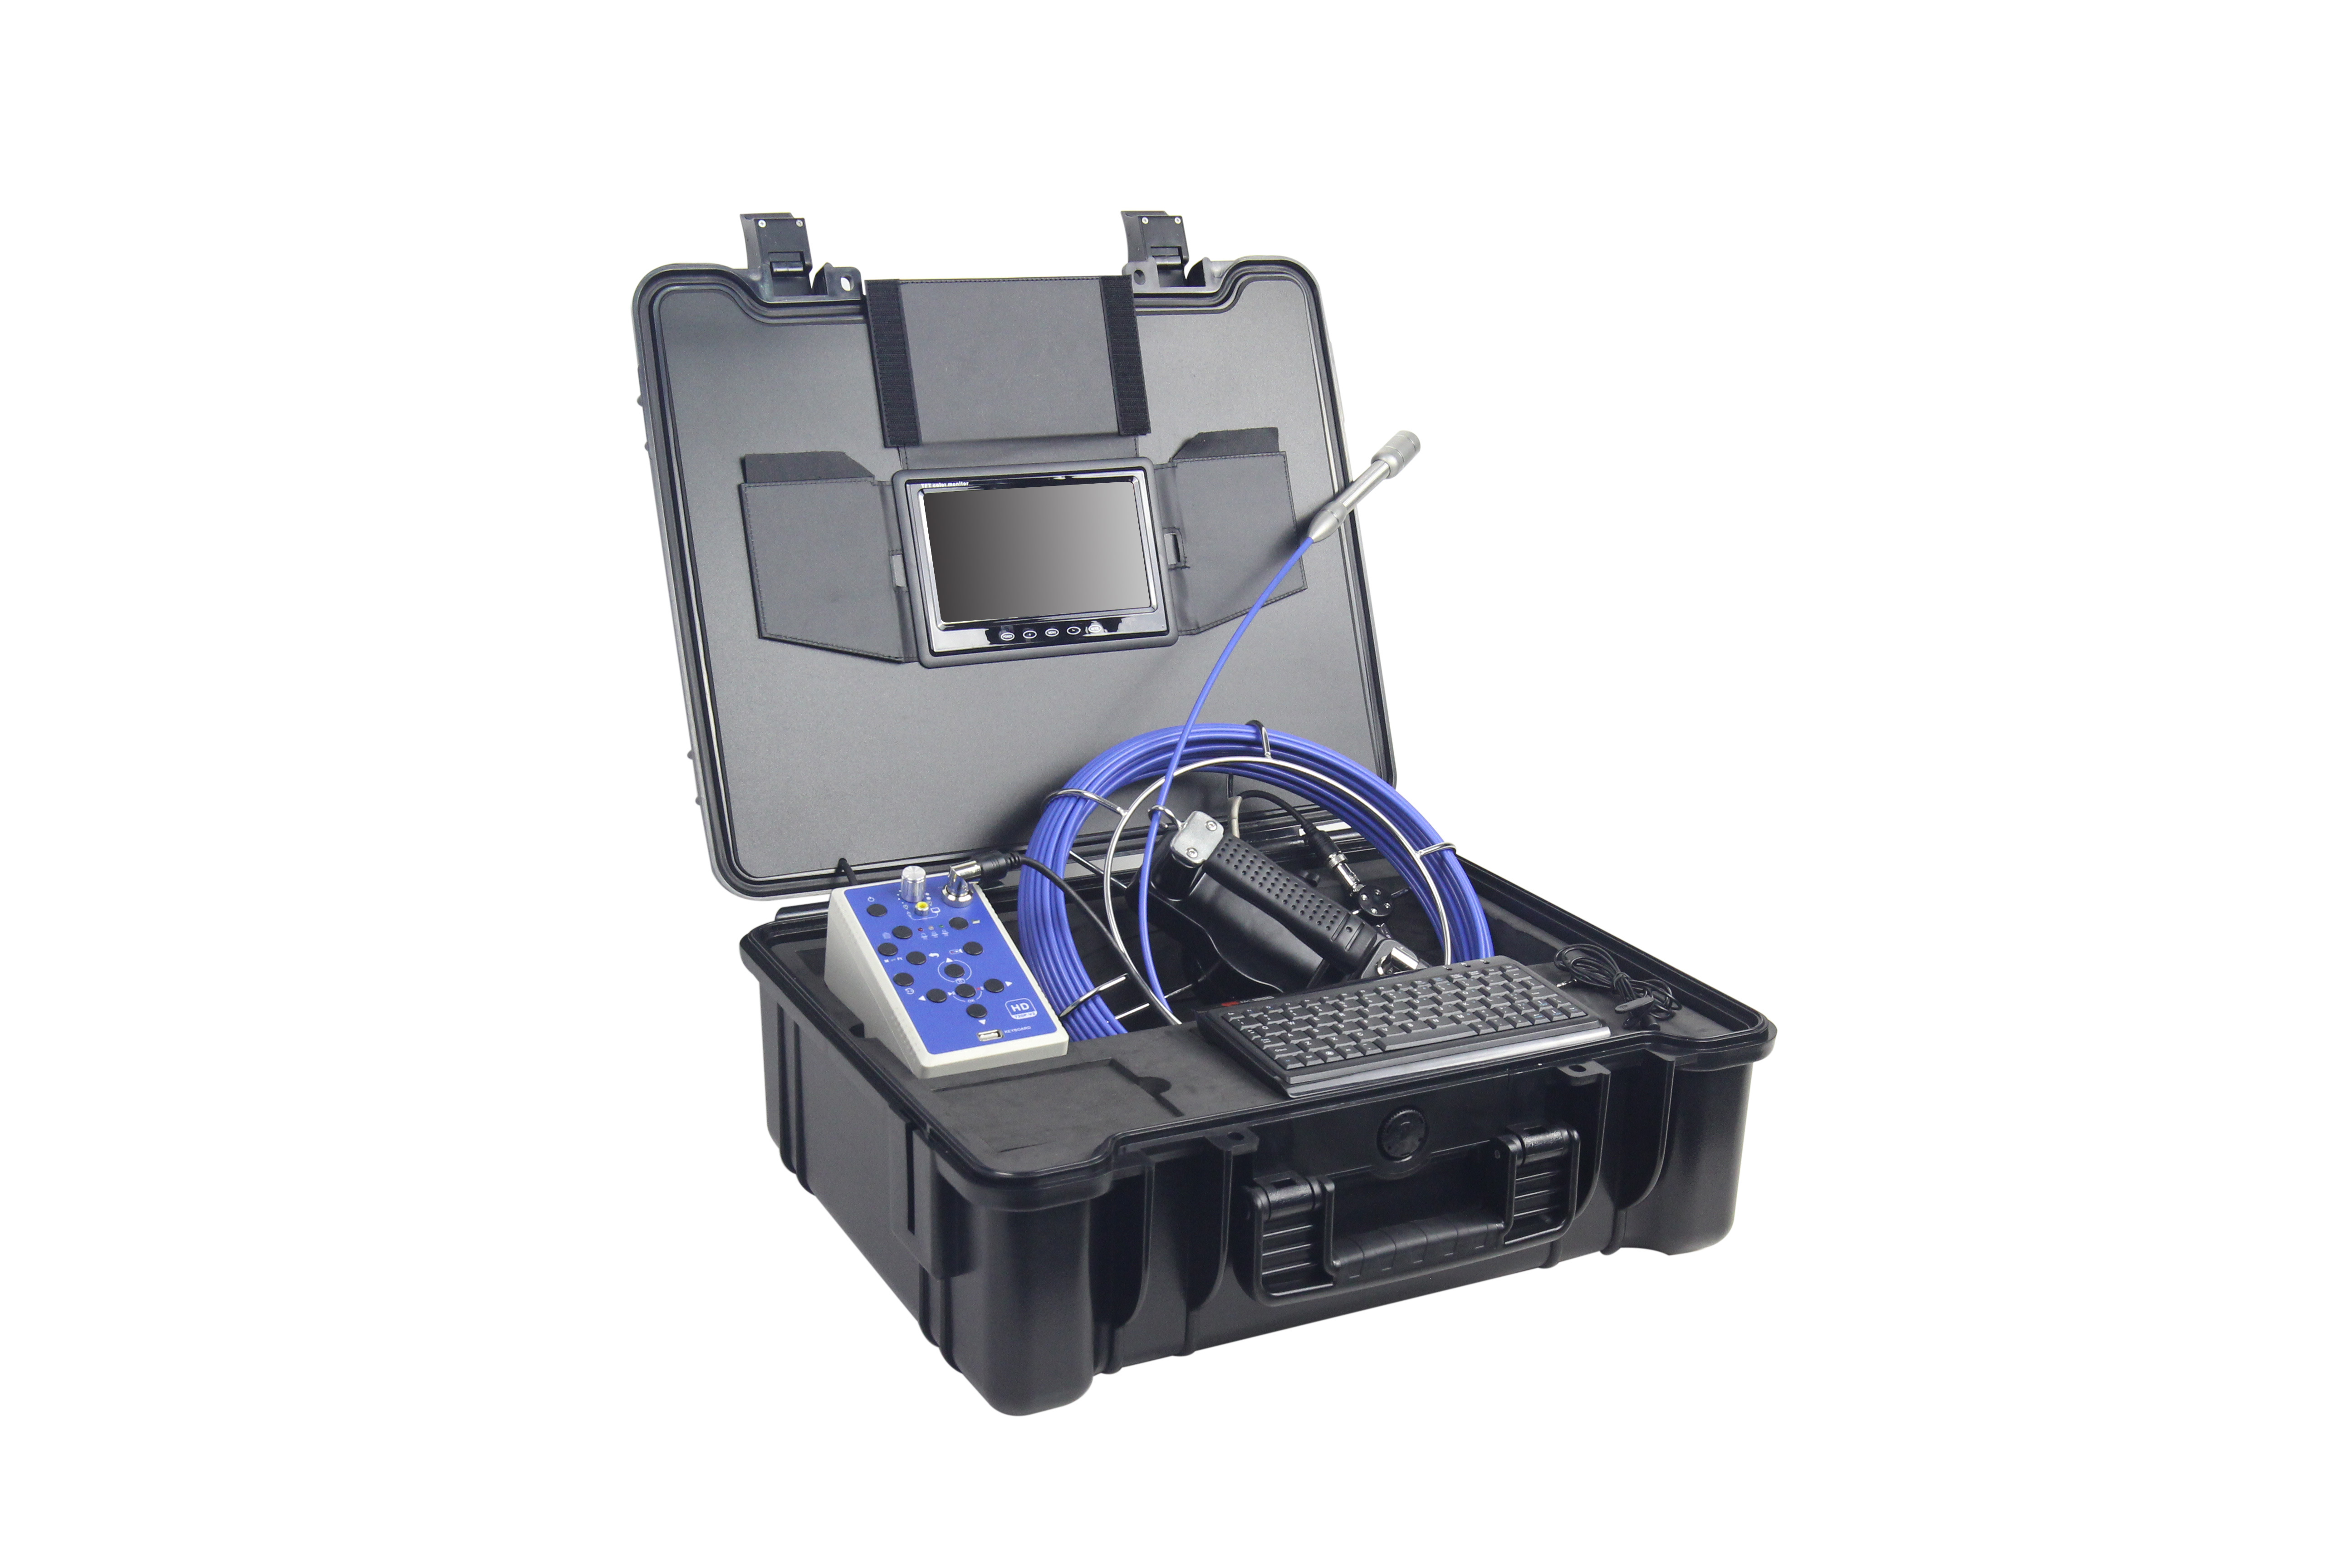 Pipe Inspection camera PRO H1 C23